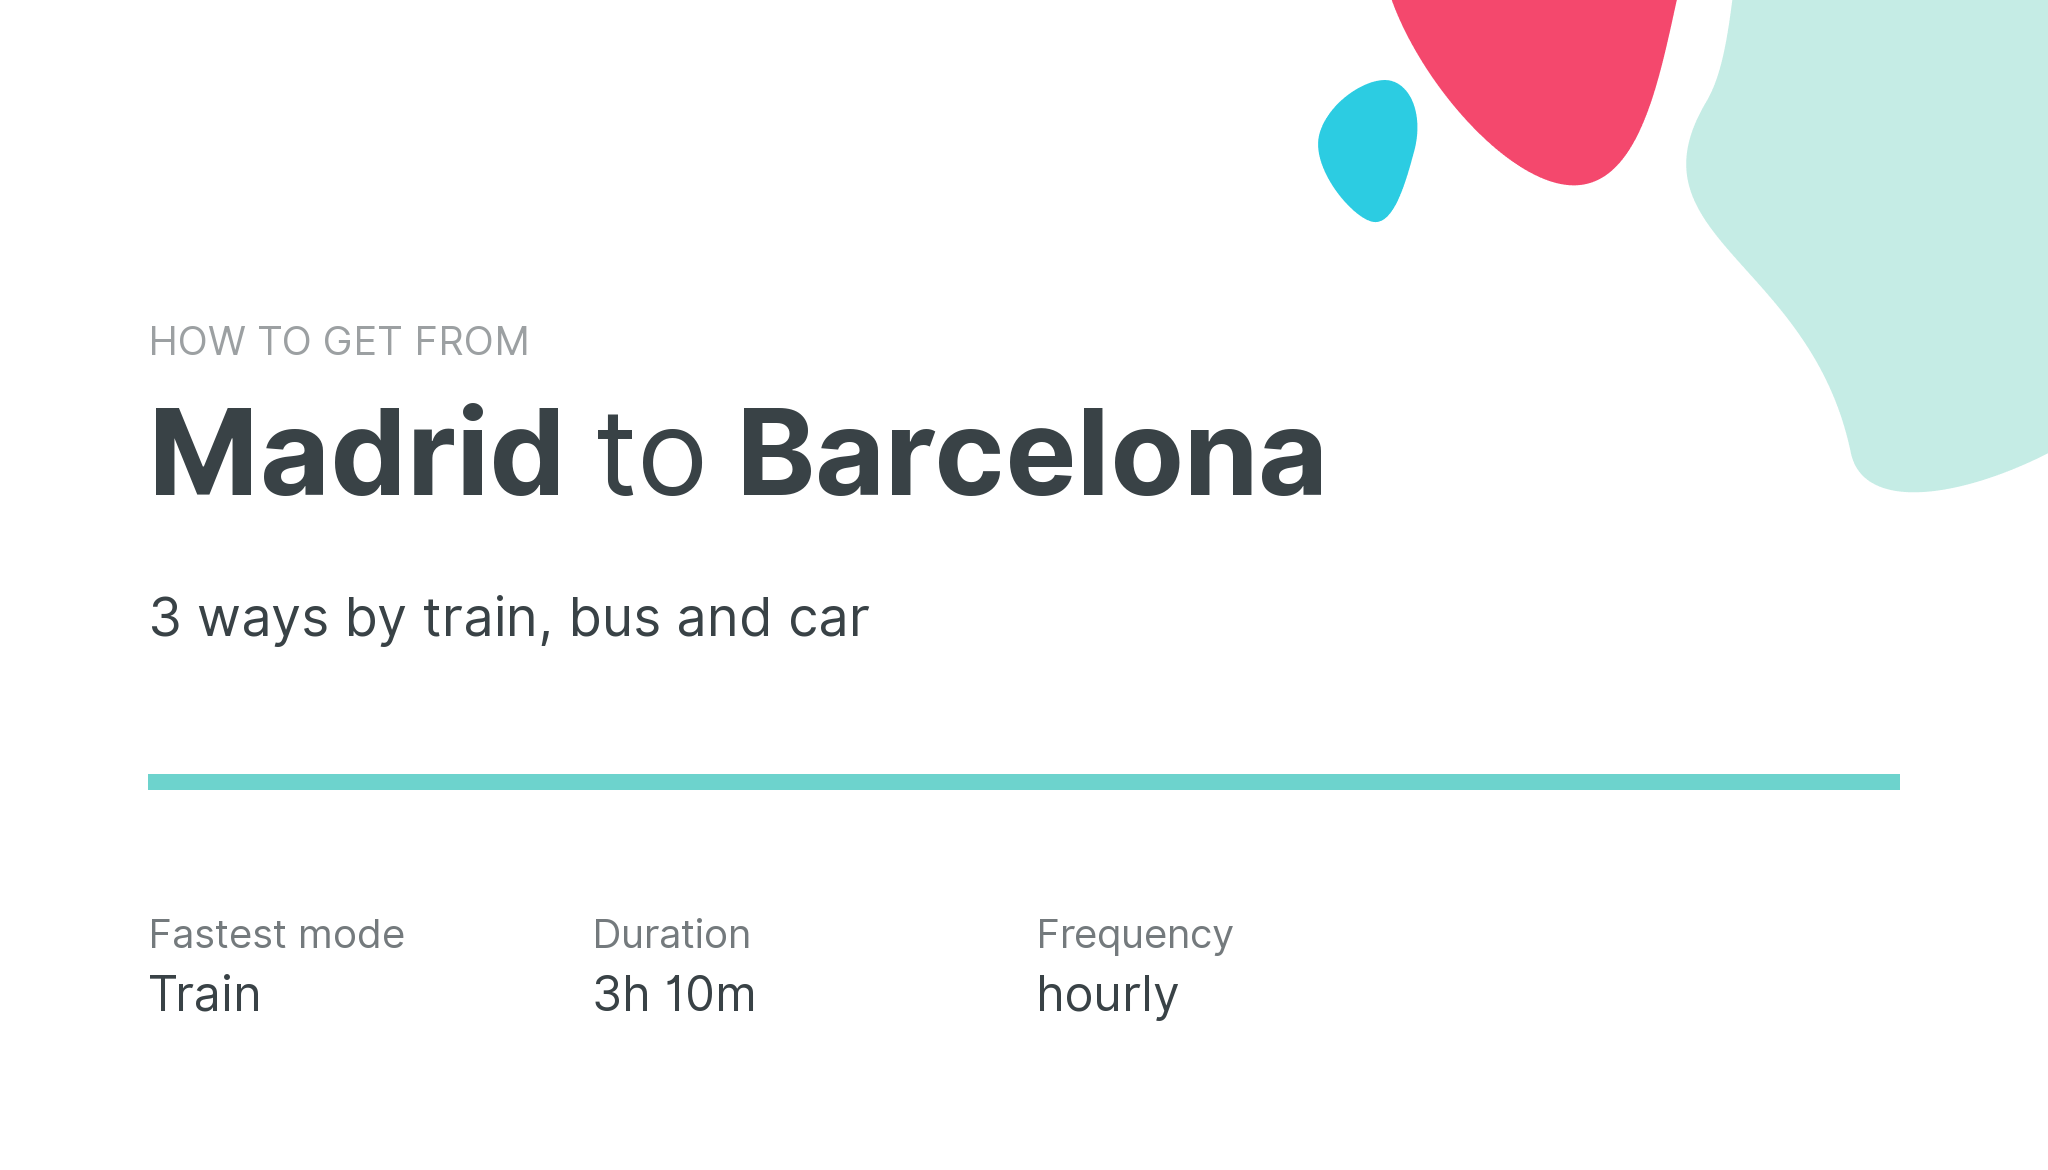 How do I get from Madrid to Barcelona